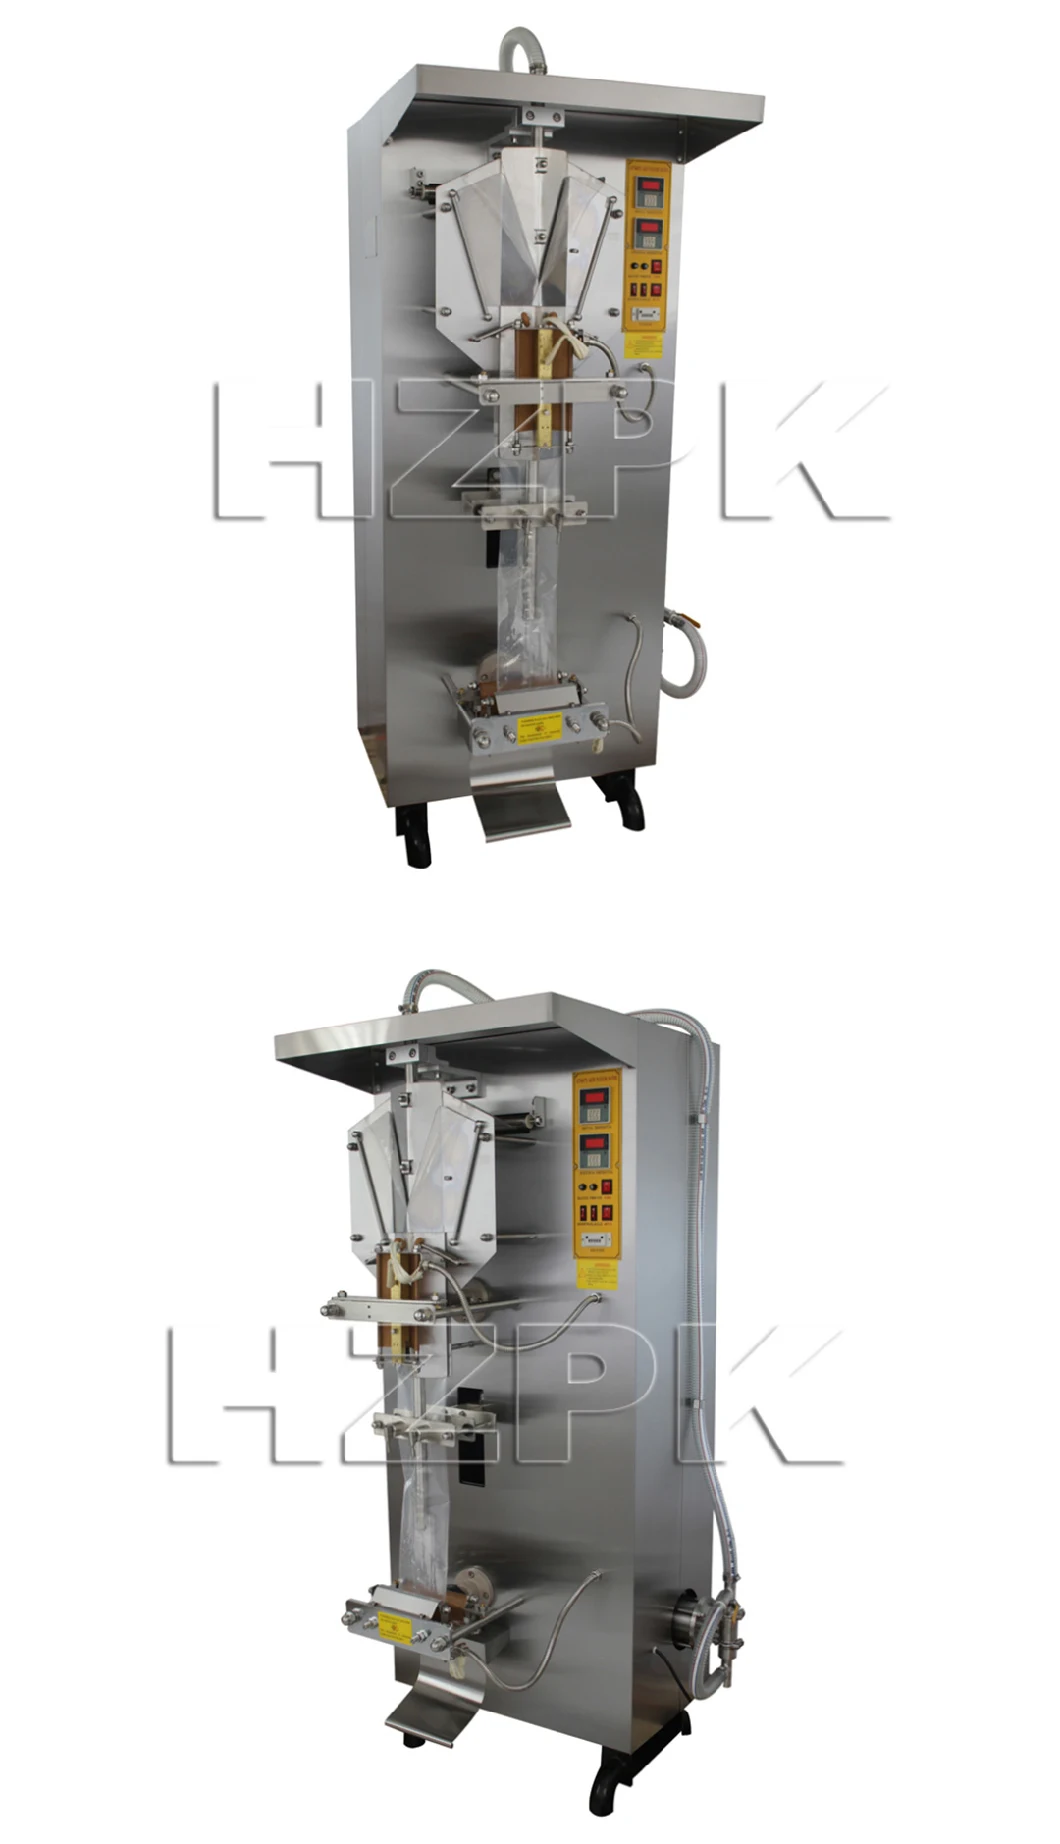 Hzpk Automatic Small Plastic Bag Sachet Water Liquid Multi-Function Packaging Filling Forming Machinery